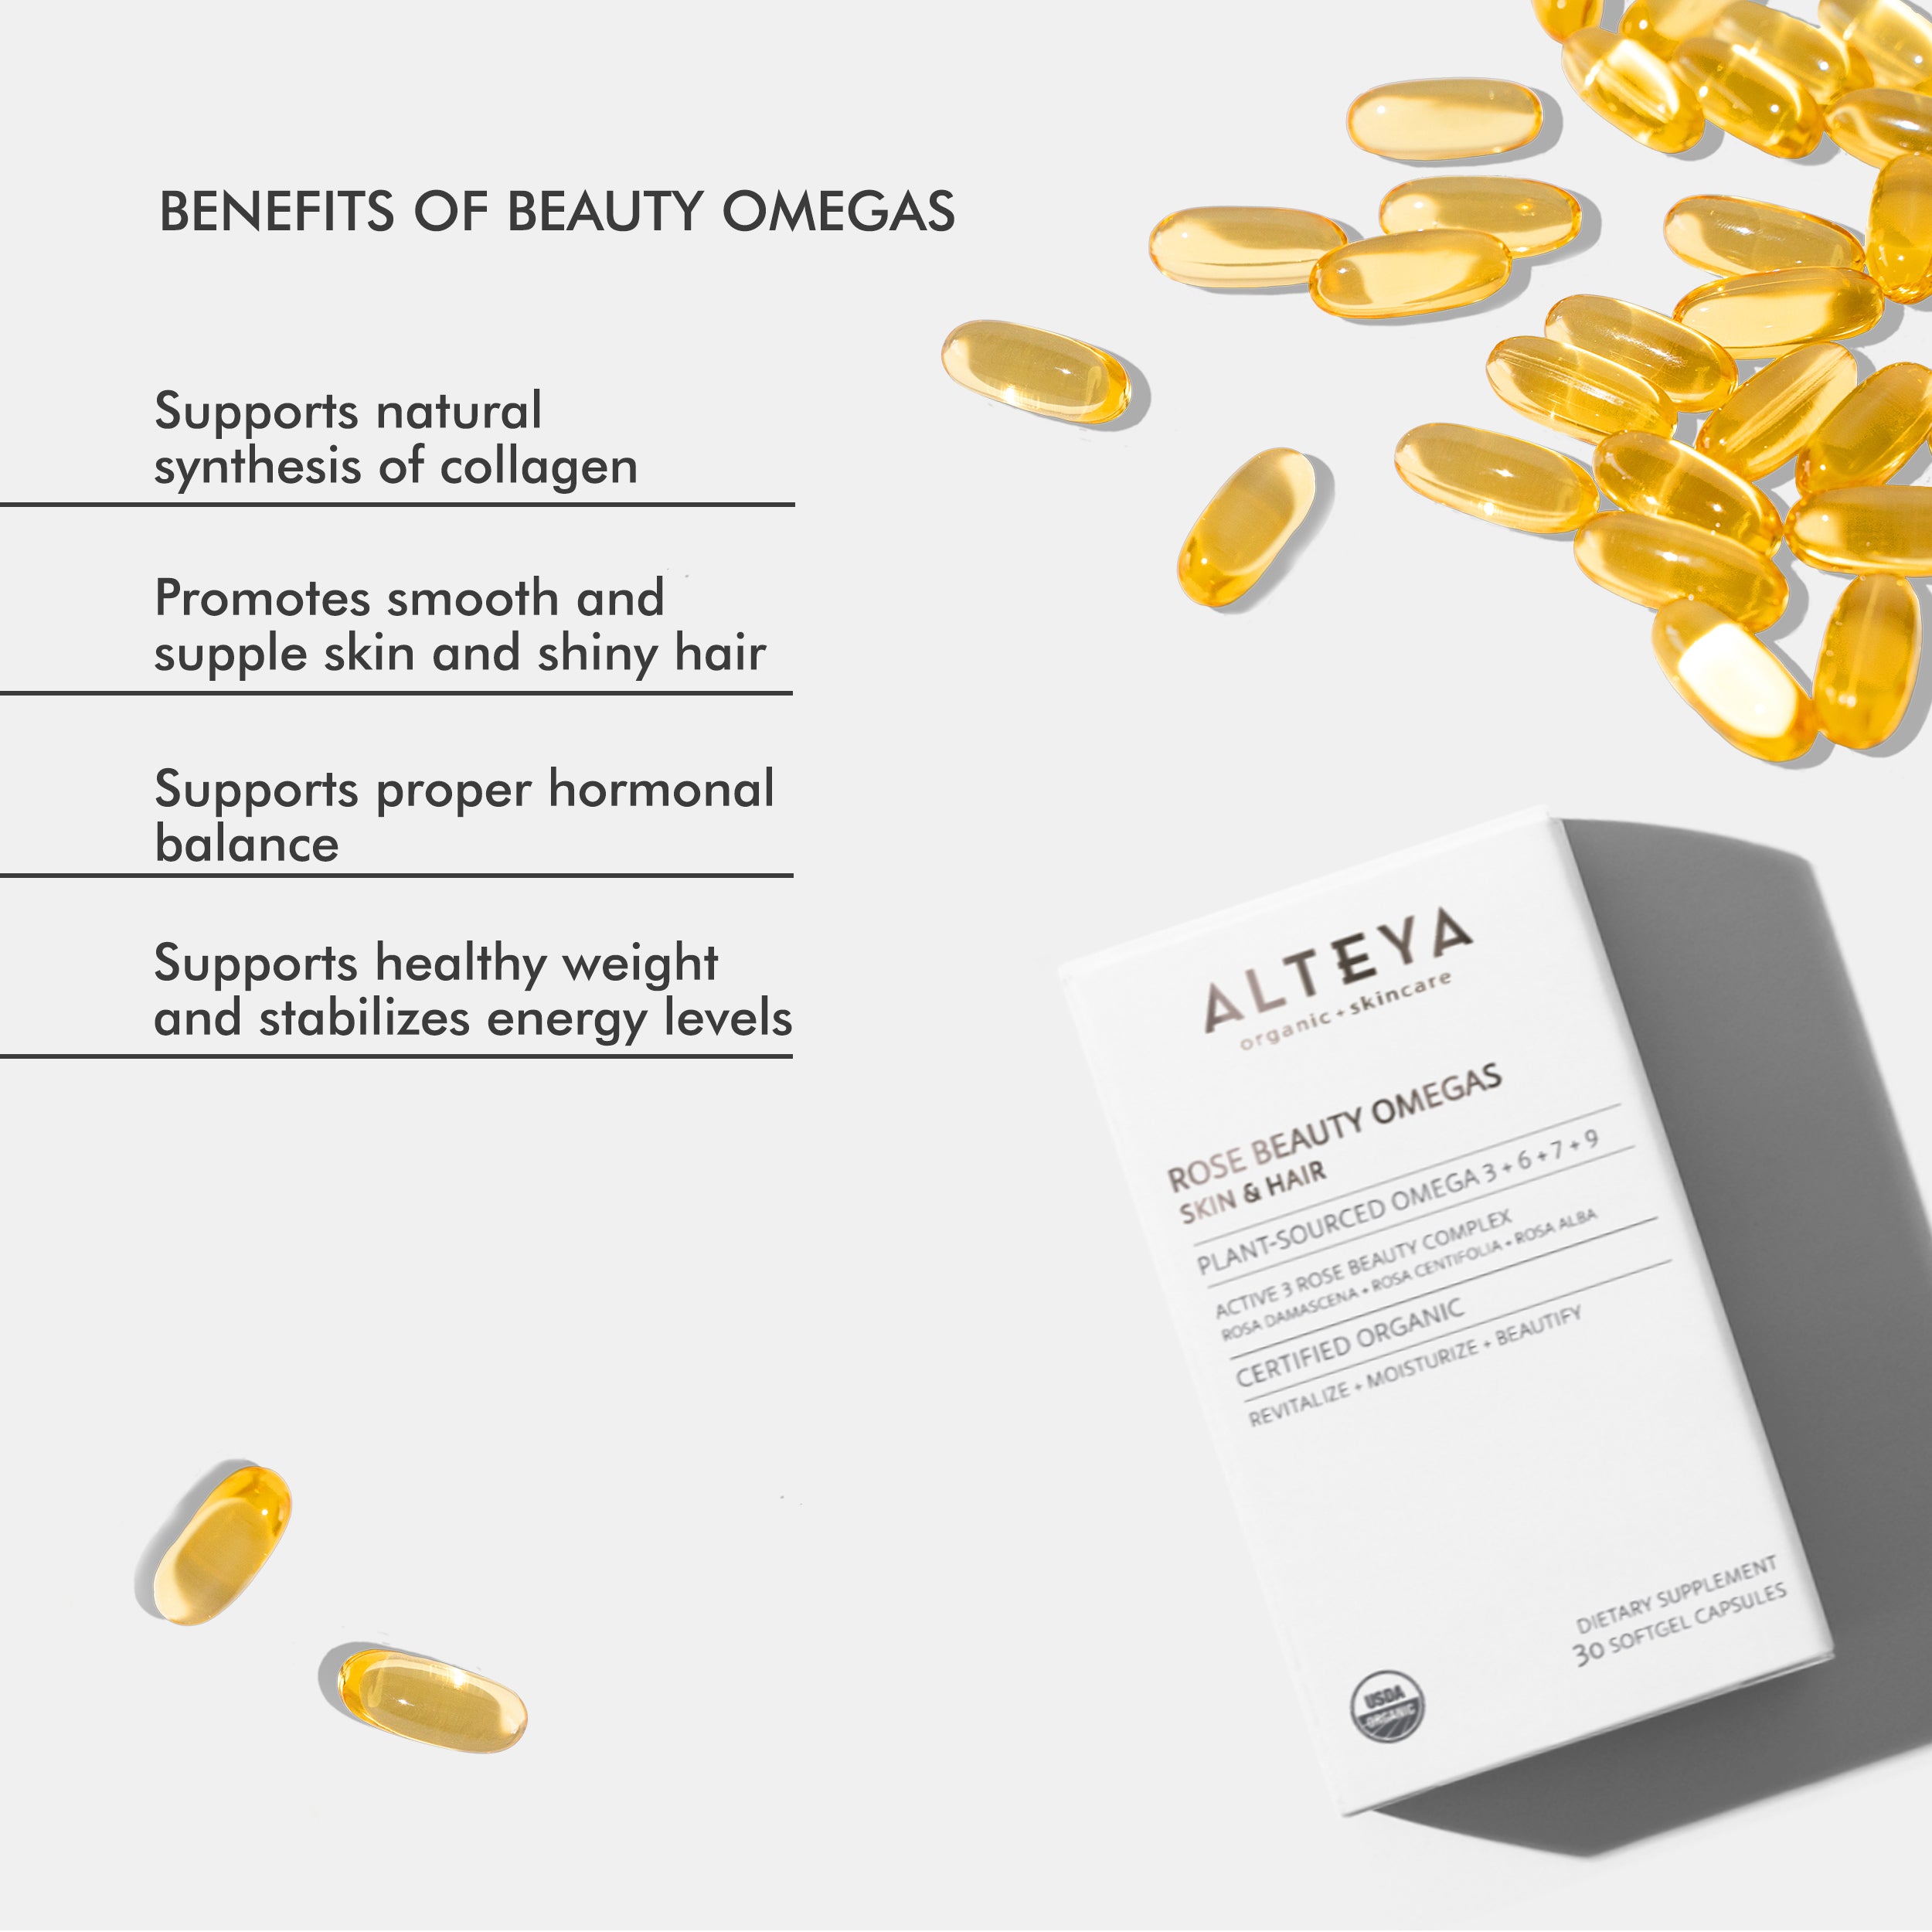 Discover the exceptional benefits of Rose Beauty Omegas, an Alteya Organics dietary formula that supports healthy skin and nourishes hair.